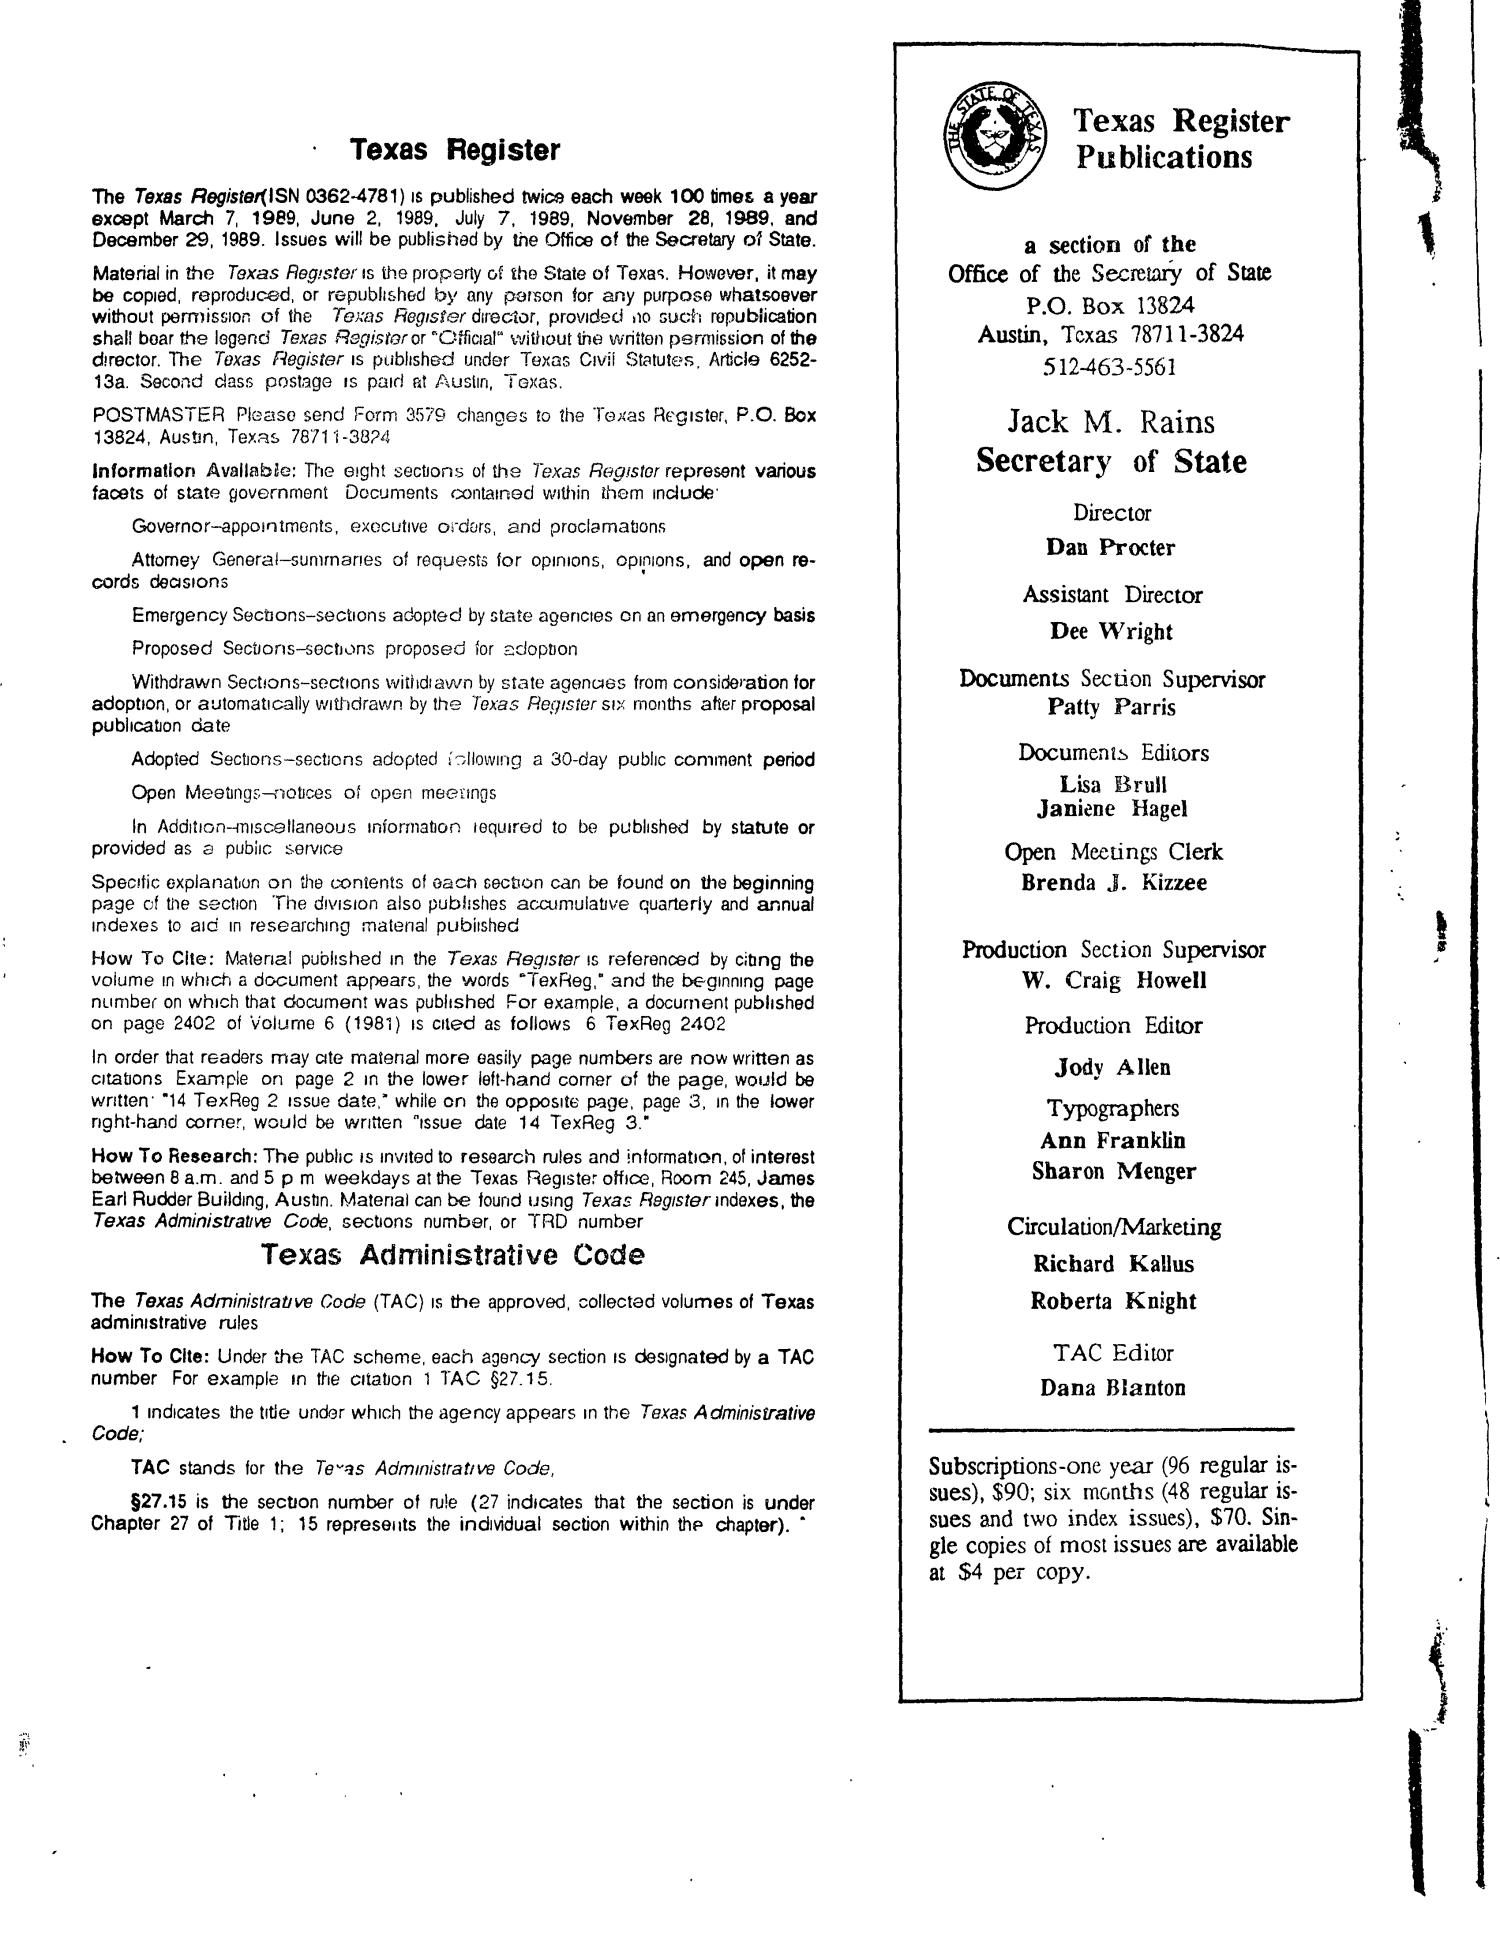 Texas Register, Volume 14, Number 4, Pages 235-293, January 13, 1989
                                                
                                                    236
                                                